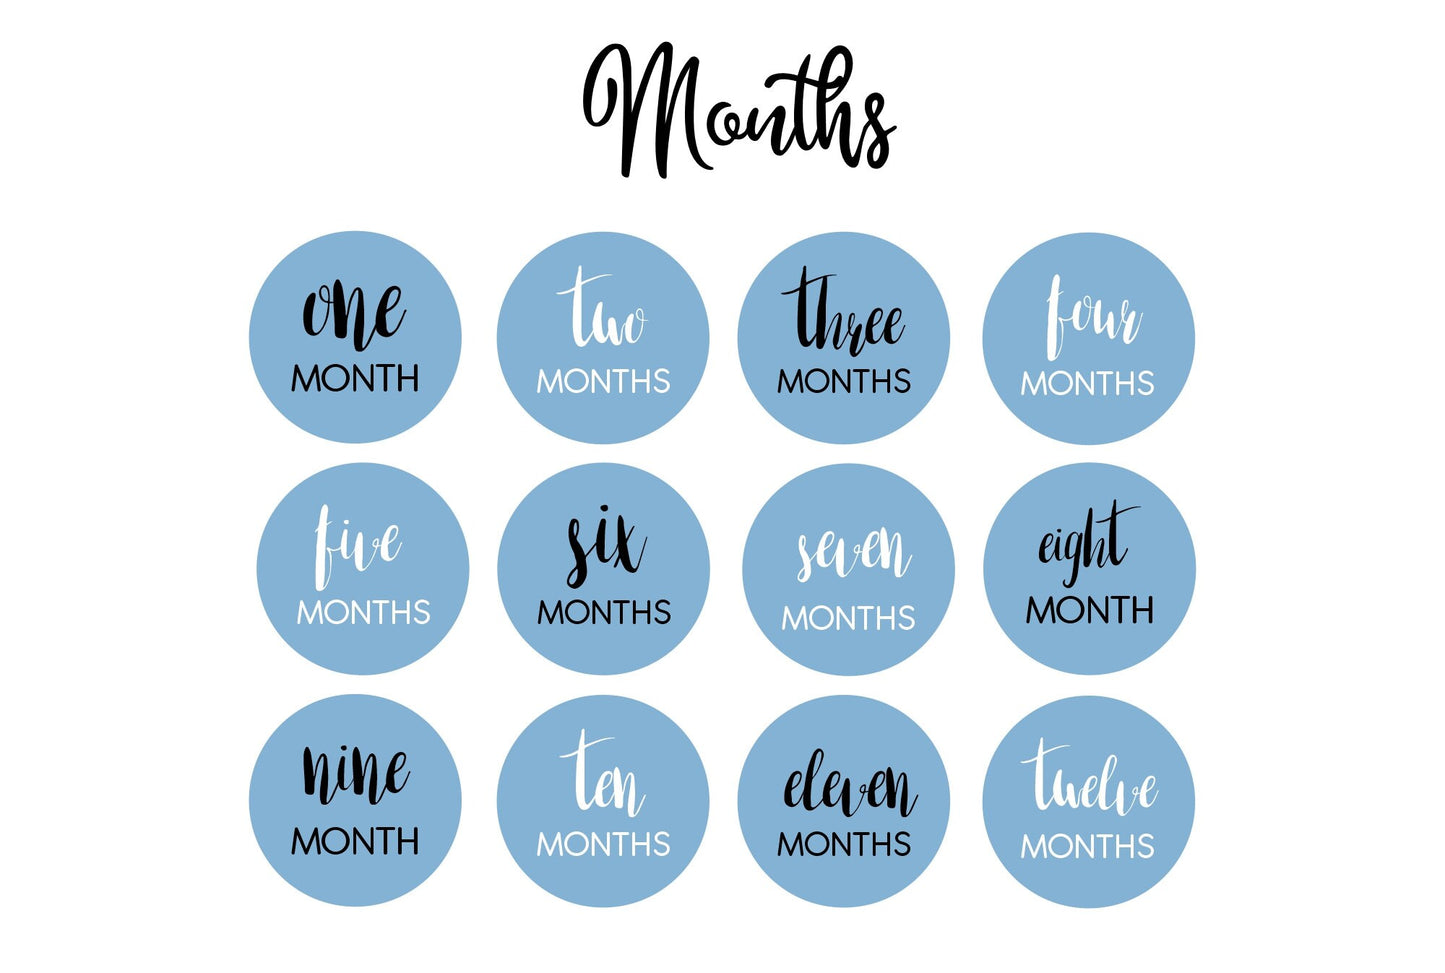 Wooden Milestone Markers, Circle Baby Monthly Milestone Cards, First Year Photo Props, Baby Shower Gift